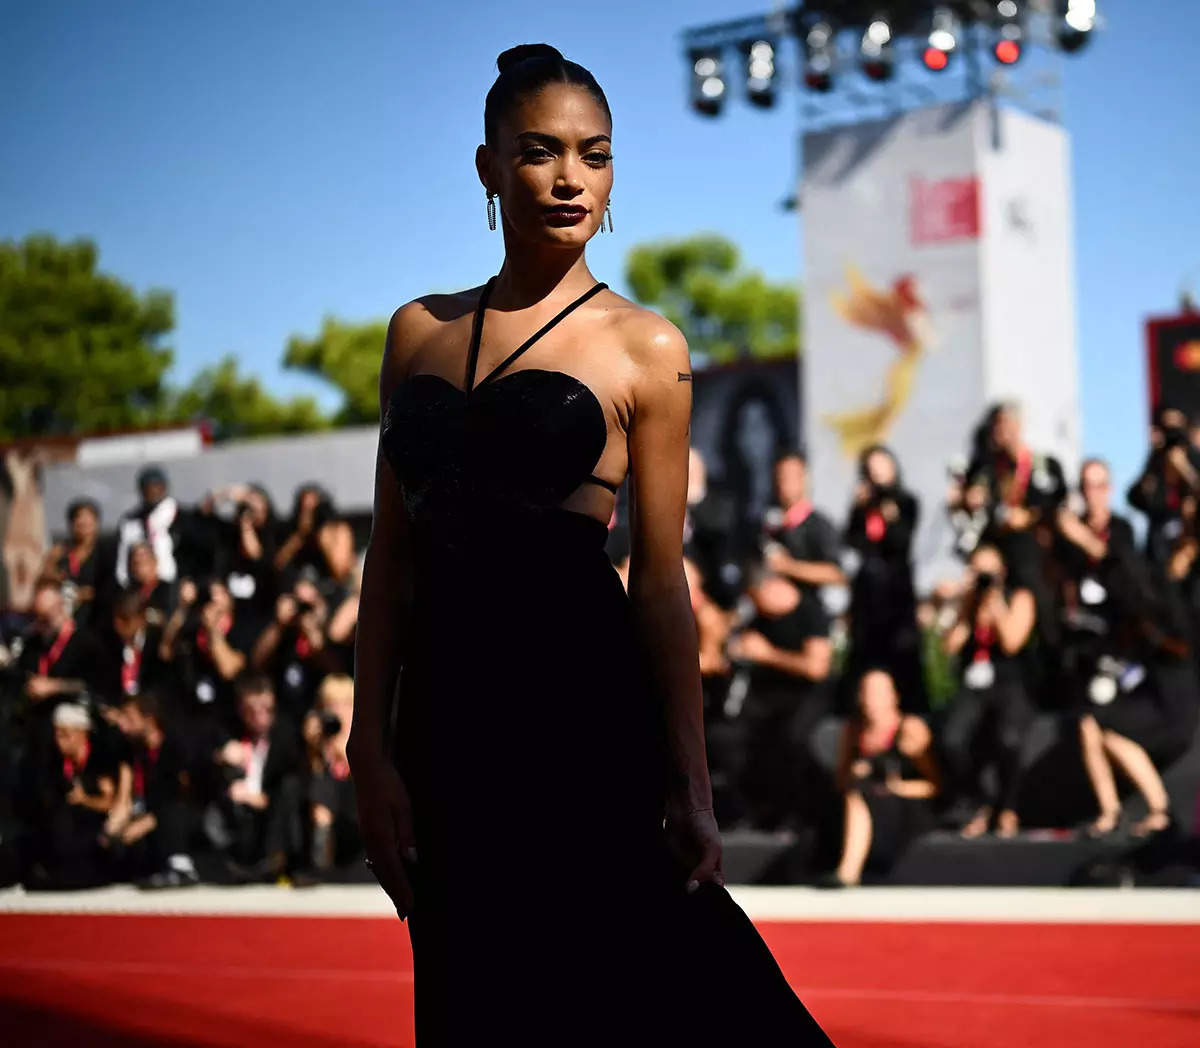 Venice Film Festival 2022: From Julianne Moore, Barbara Palvin to Grace Elizabeth; these stars stole the show with their fashion statements